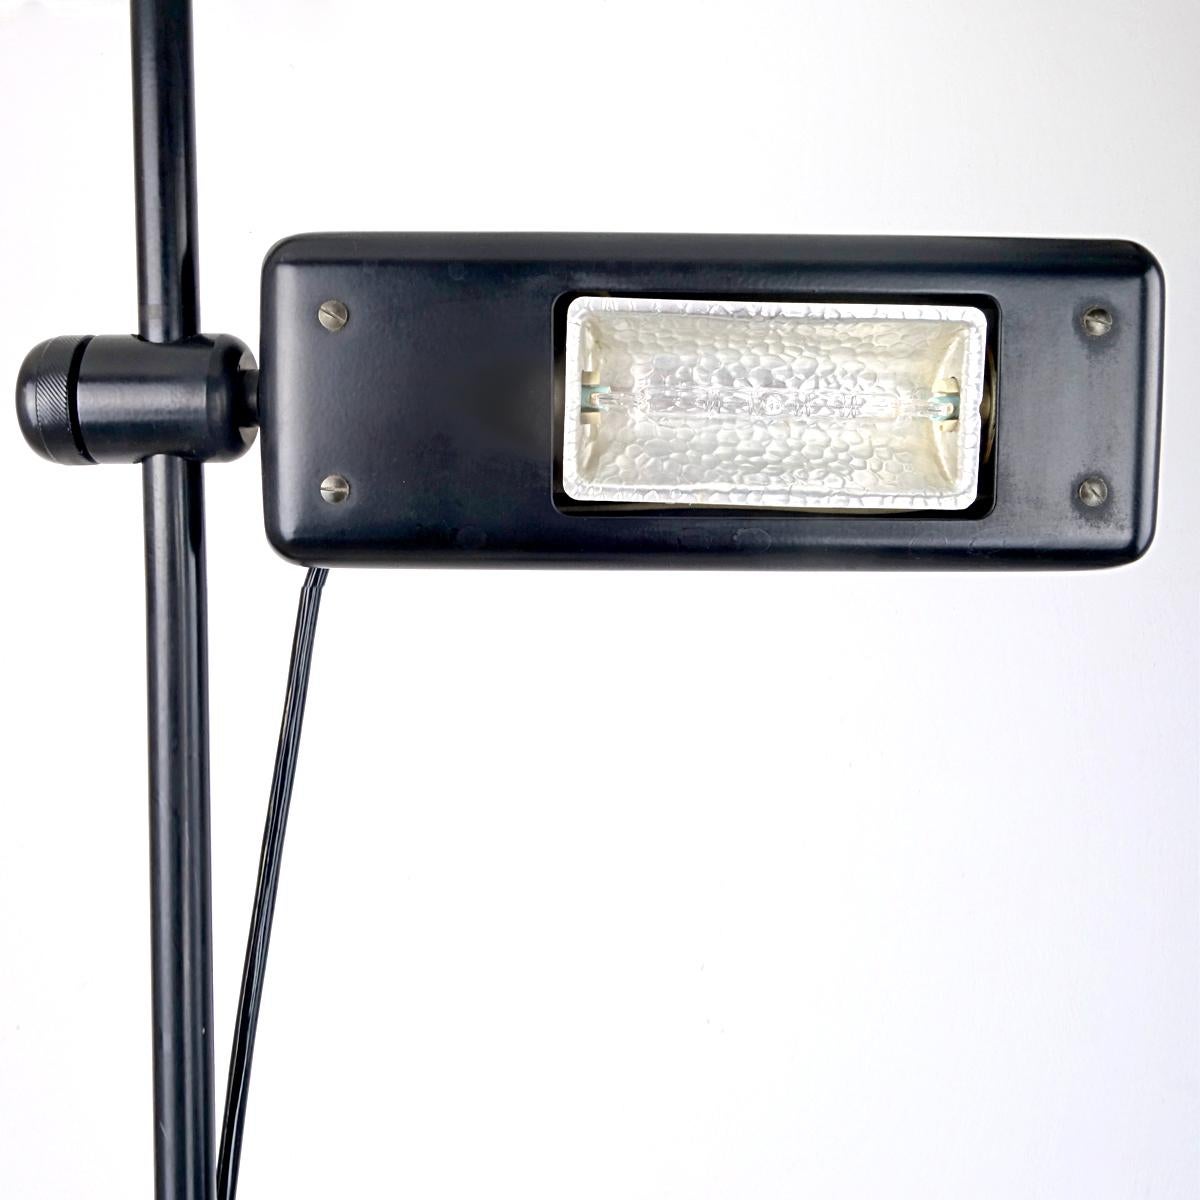 This floor lamp was designed by Gianfranco Frattini for Relco. It can both be used as an uplighter and as a reading light. With built-in dimmer. No longer in production.